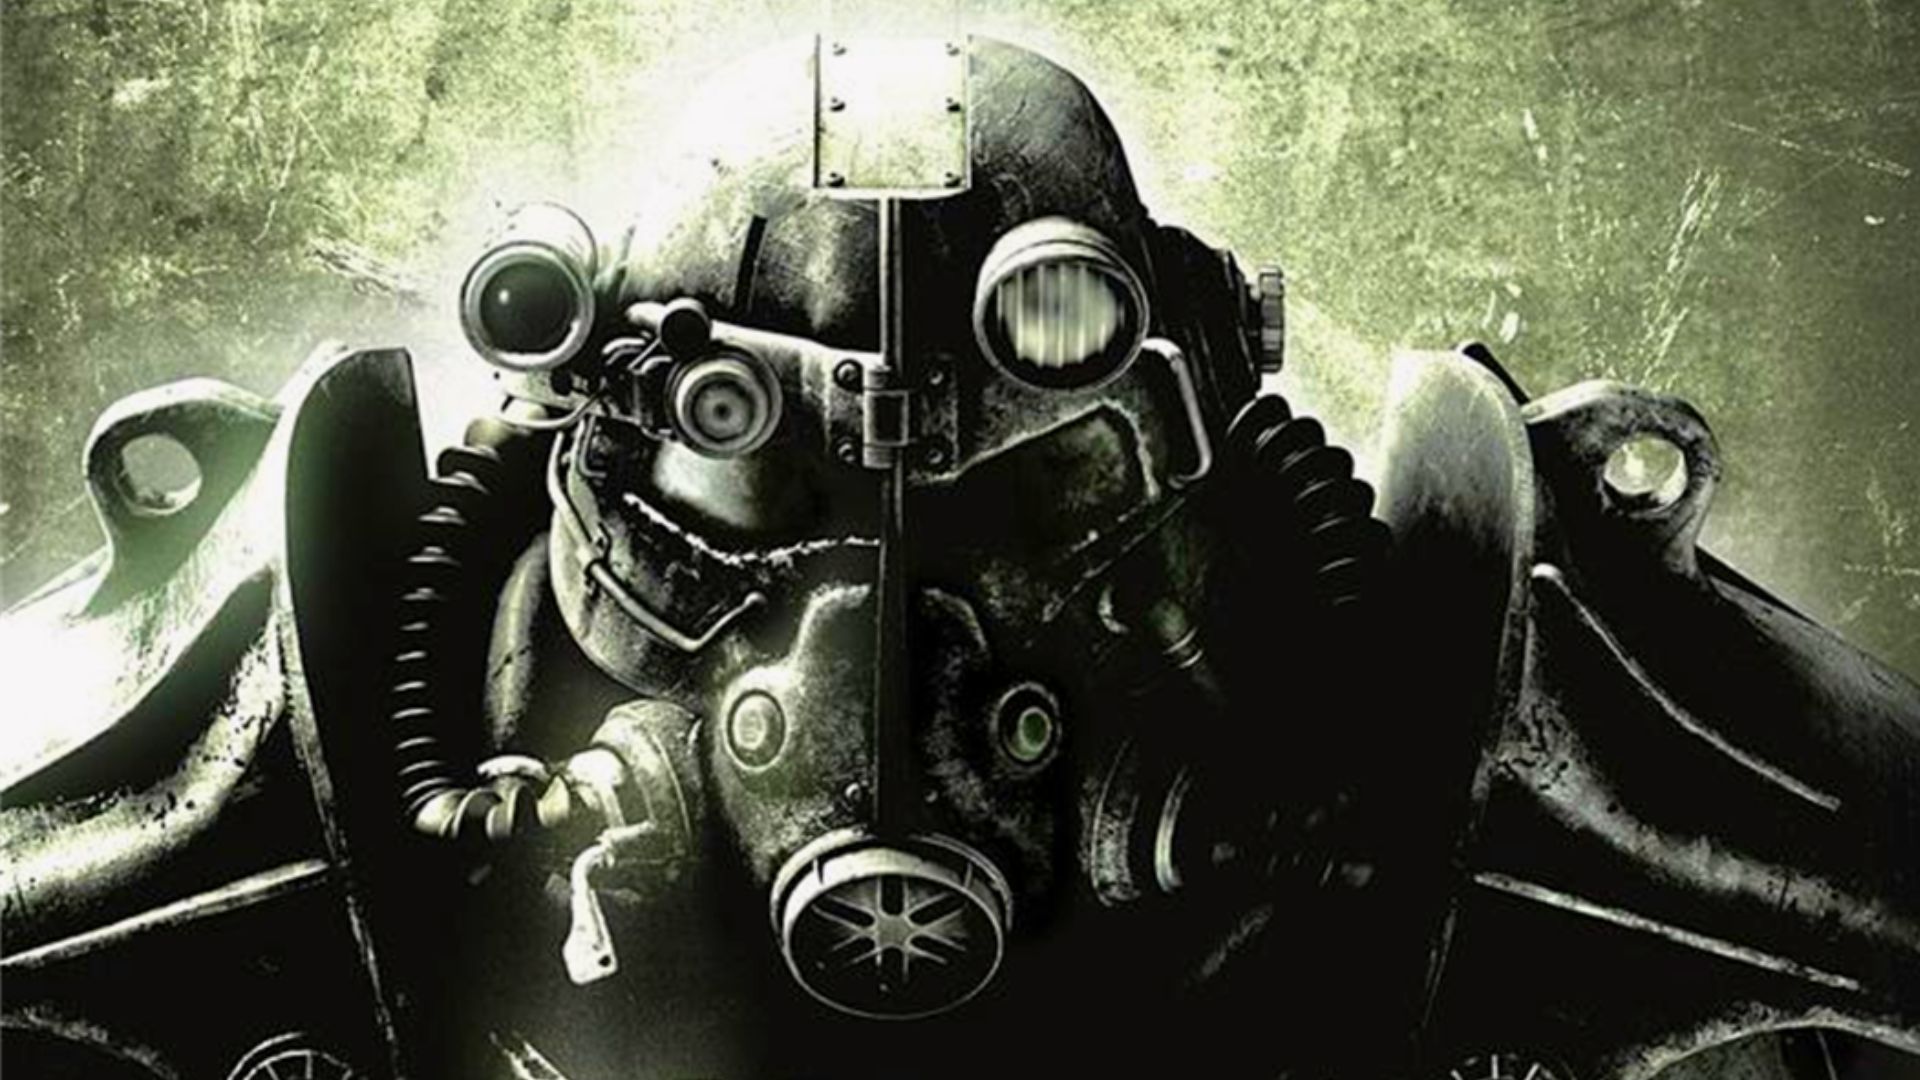 FALLOUT 3 REMASTERED LEAK!!! Everything you need to know!! 